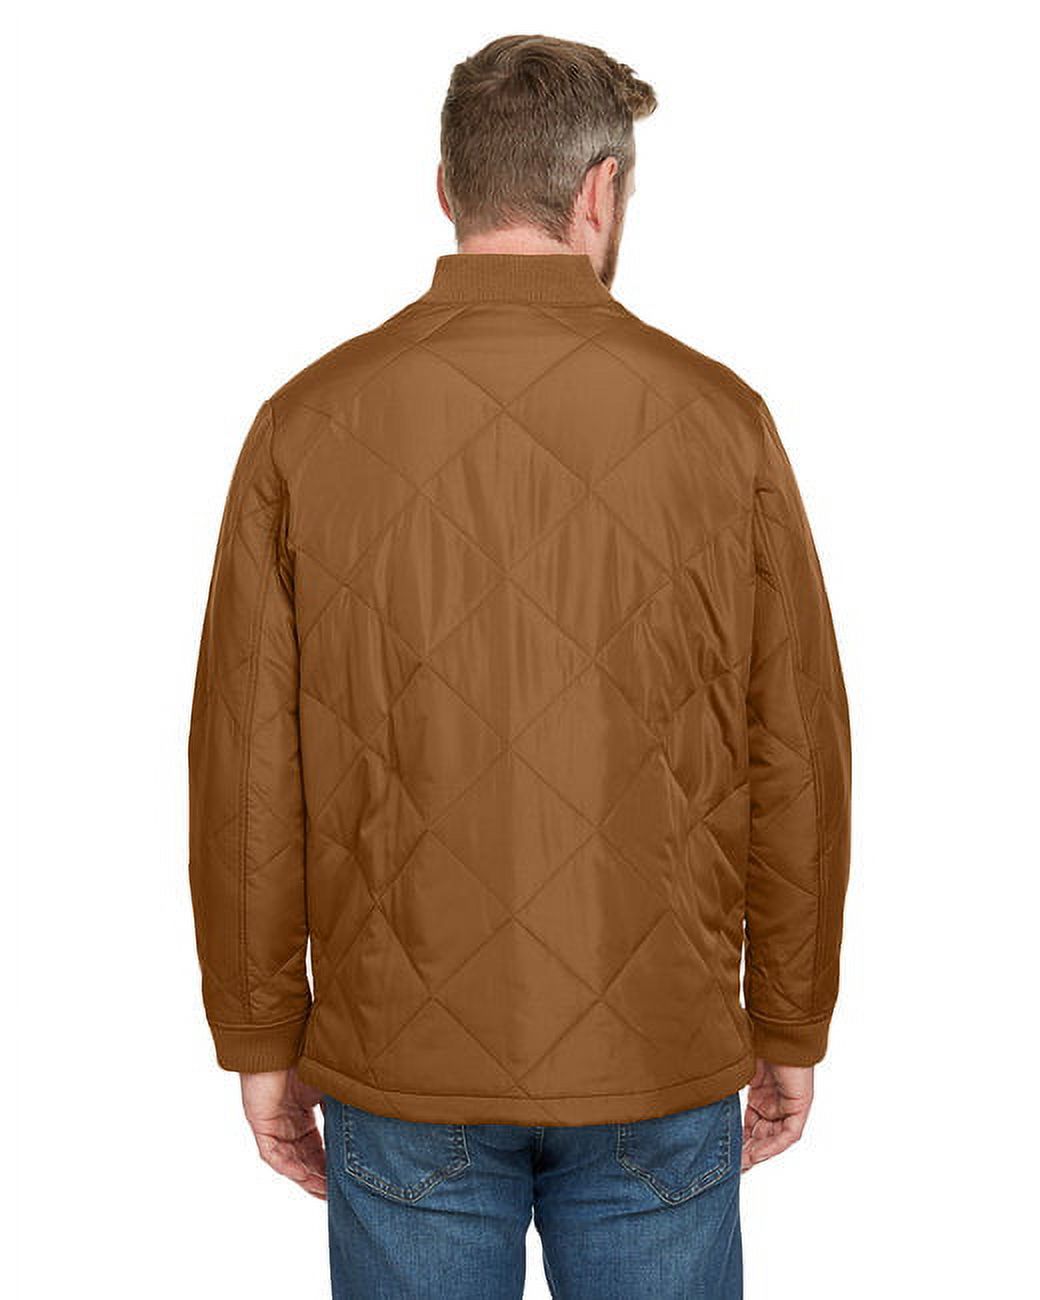 Adult Dockside Insulated Utility Jacket - DUCK BROWN - L - image 2 of 3